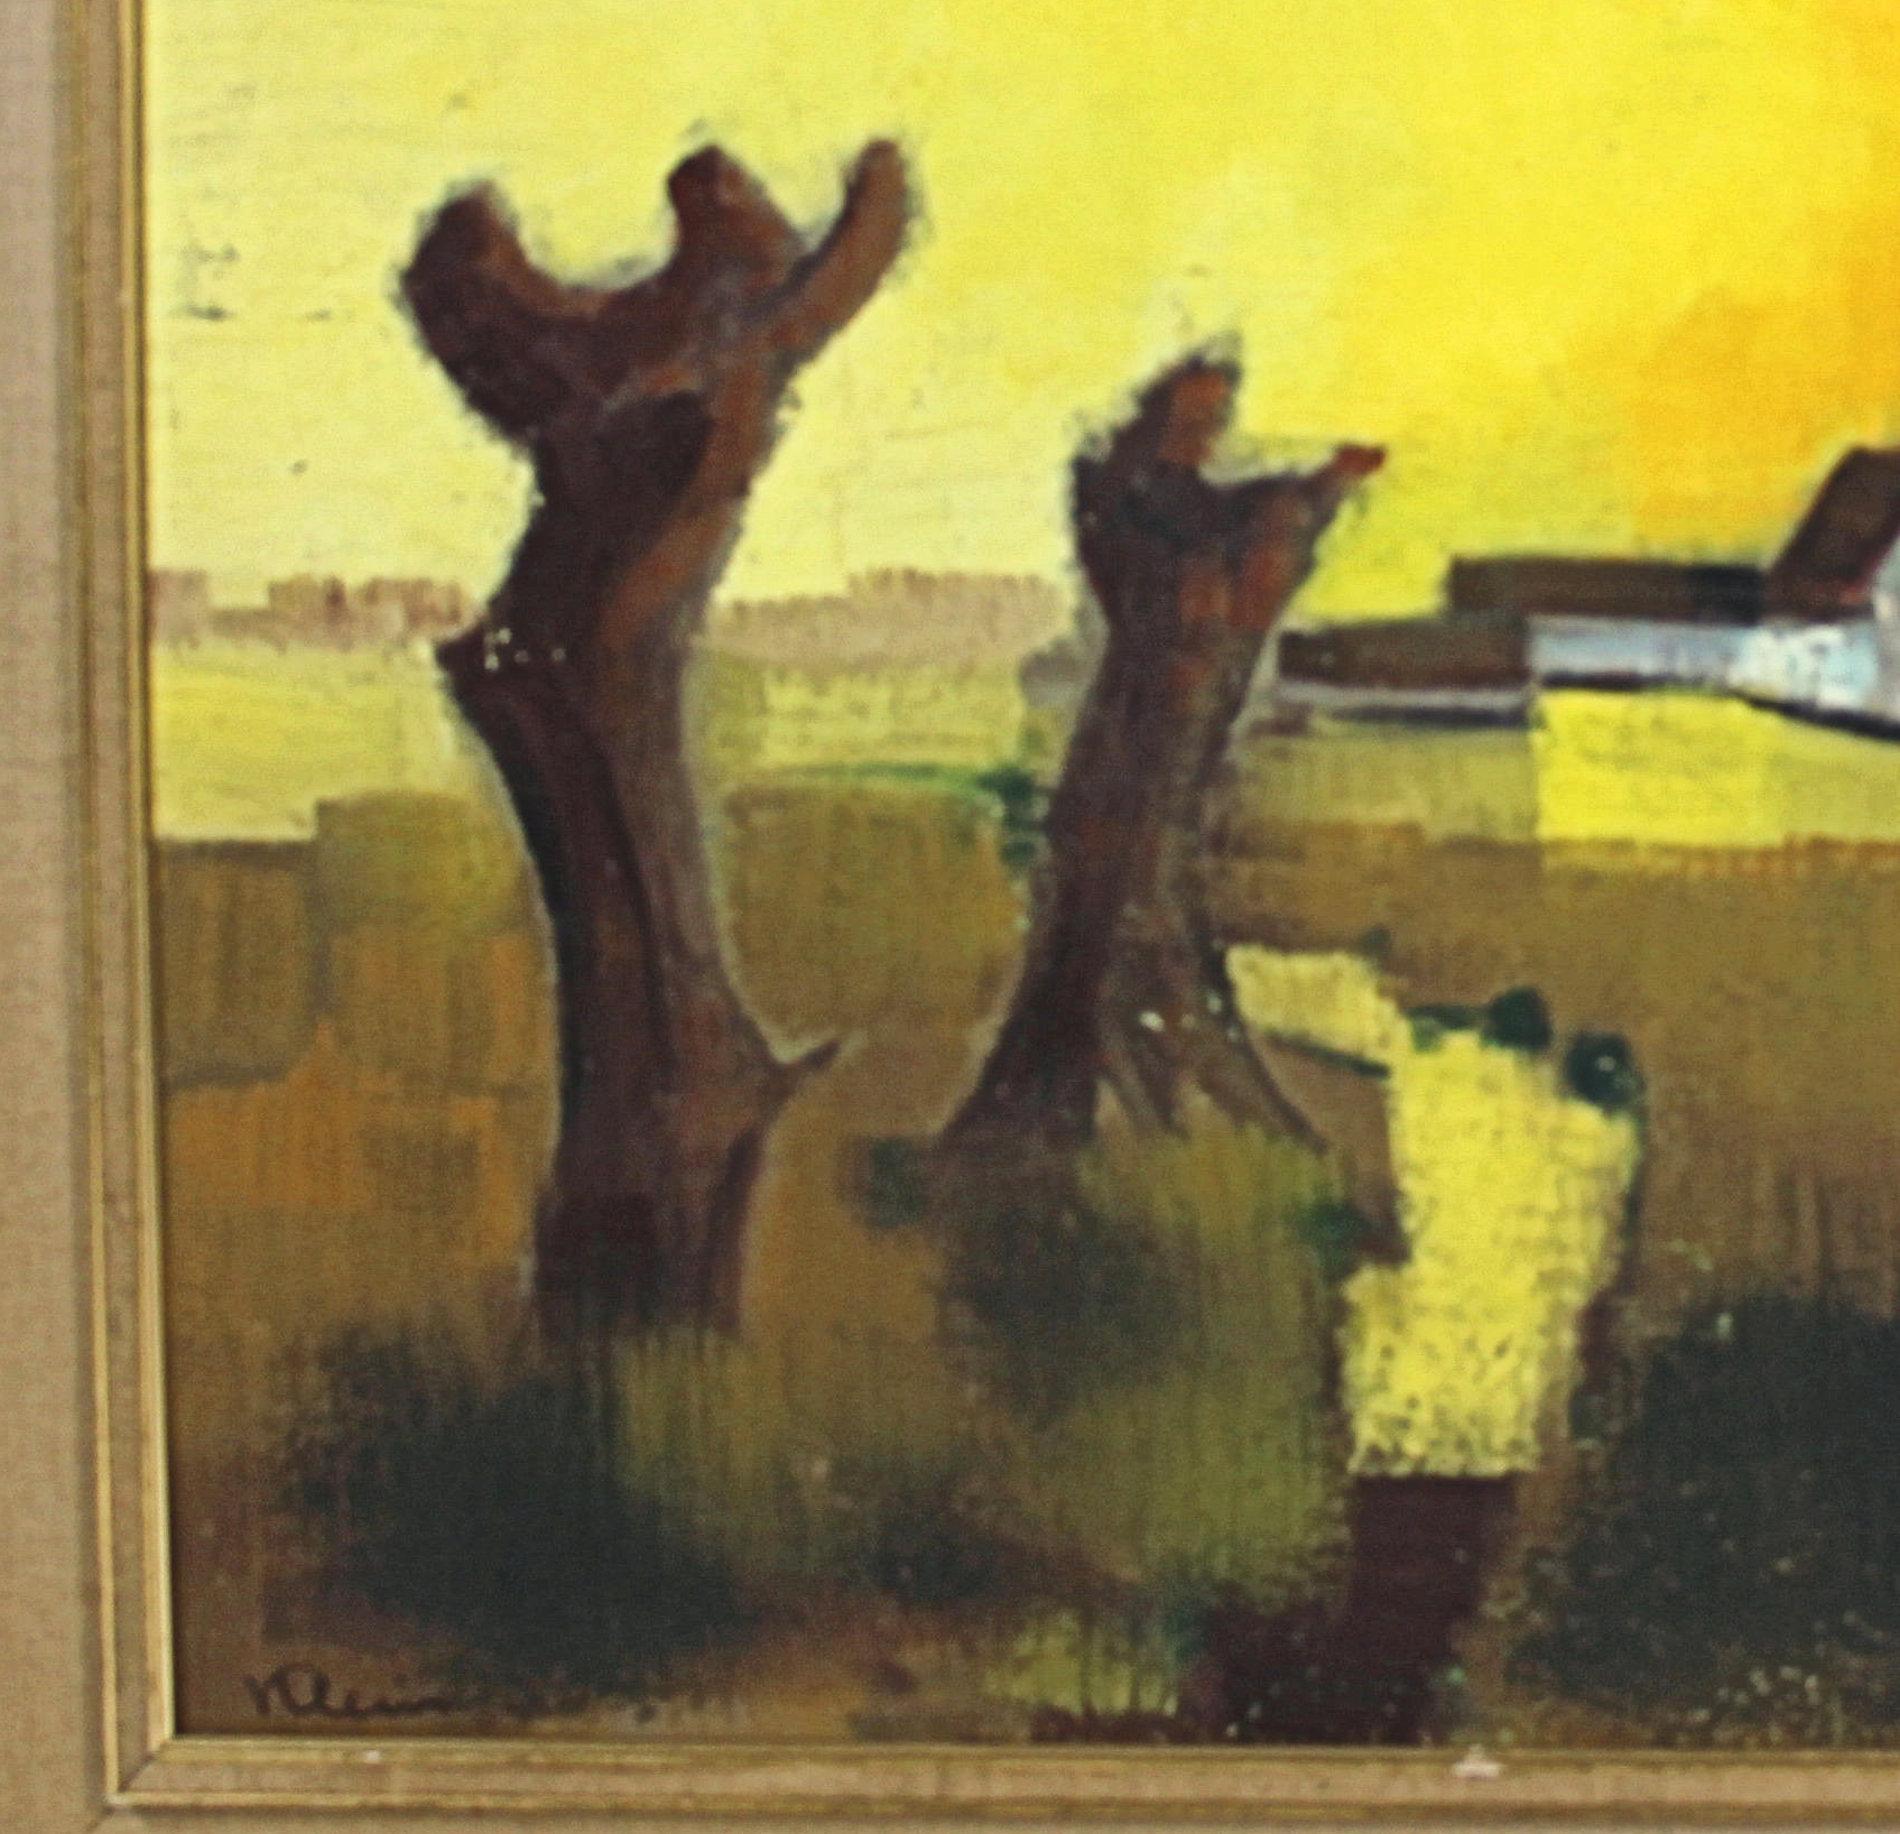 This lovely landscape of a sunset was painted by Paul Georges Klein, a 20th century French artist. (1909-1994) the painting was signed and dedicated by the artist on the back, dated 1969. This vintage piece would work well in a range of styles, both